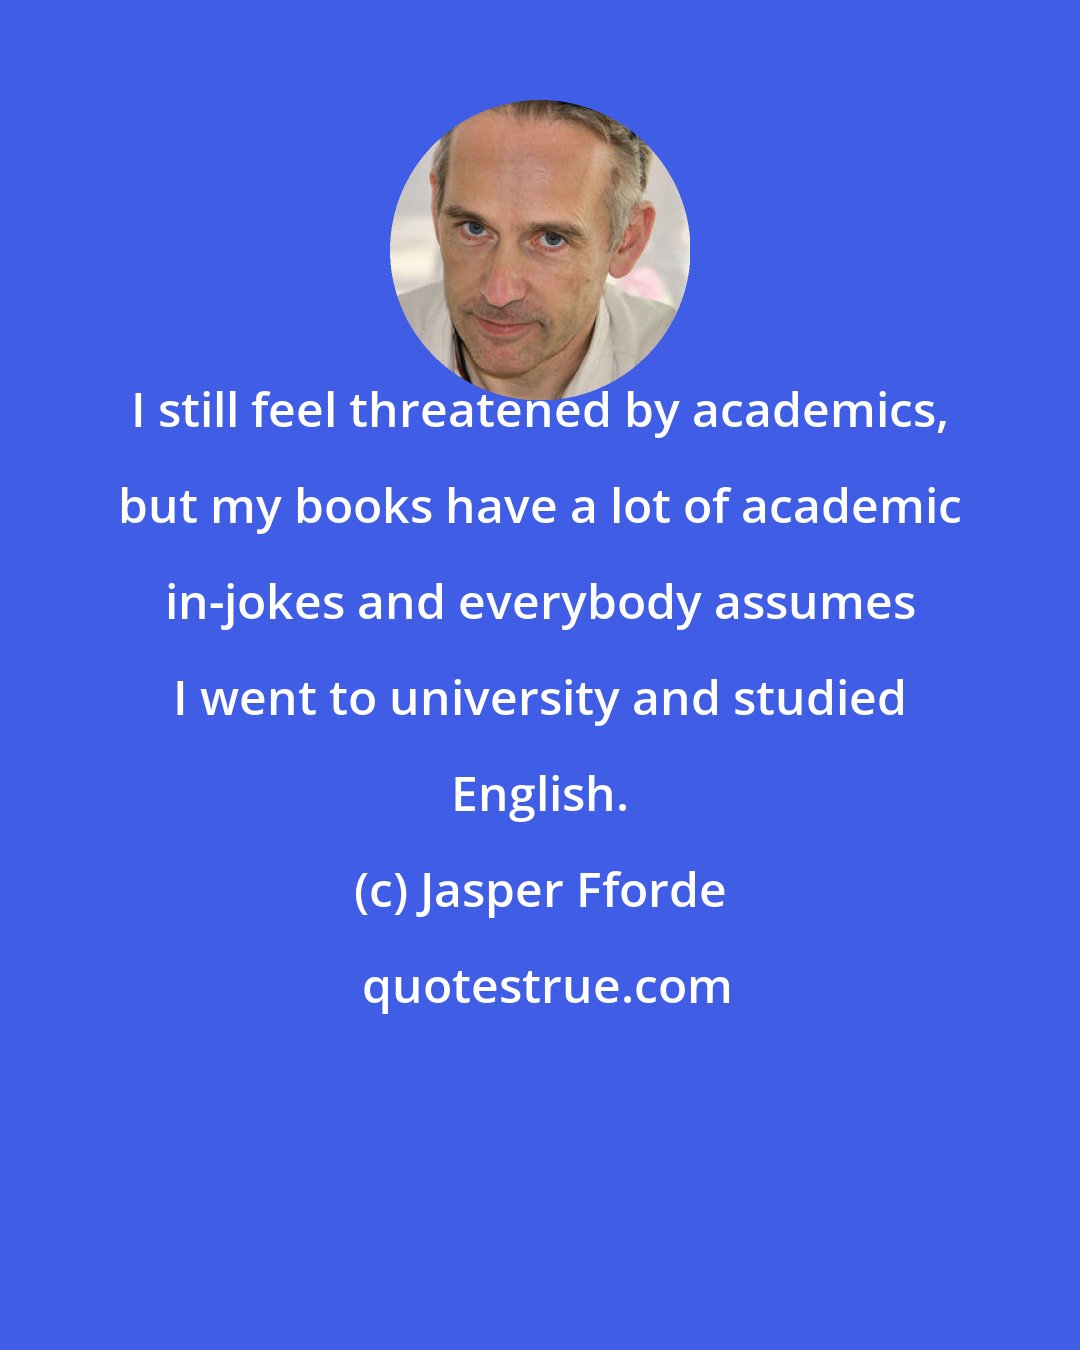 Jasper Fforde: I still feel threatened by academics, but my books have a lot of academic in-jokes and everybody assumes I went to university and studied English.